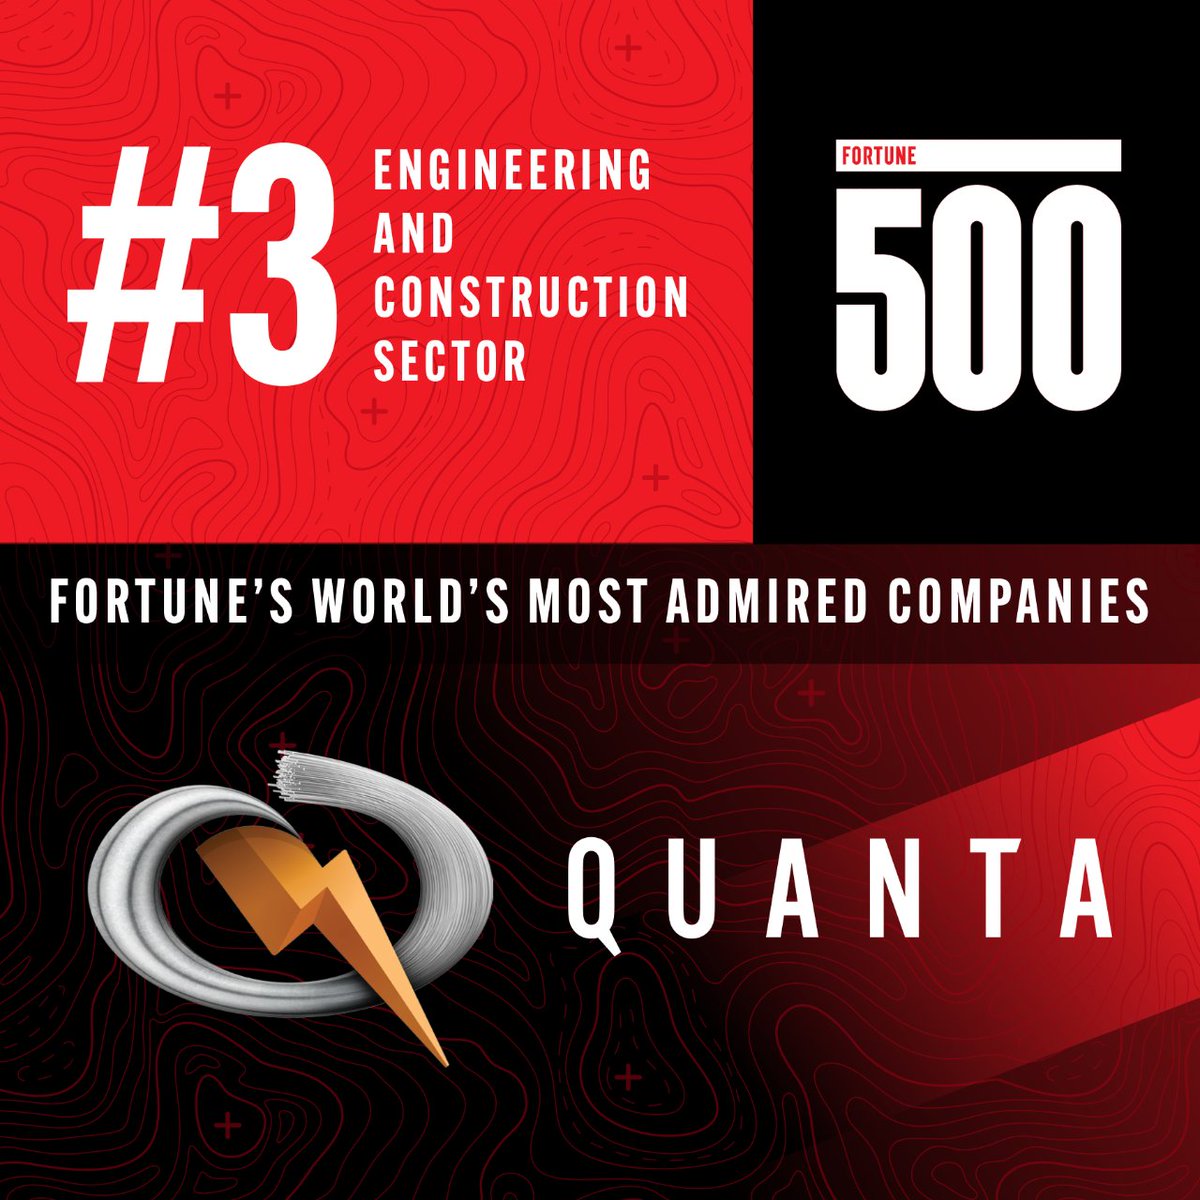 Quanta Services is proud to announce that we have been ranked #3 in the Engineering and Construction sector of Fortune’s World’s Most Admired Companies. #Quanta #Fortune500 #Construction #PoweringModernLife